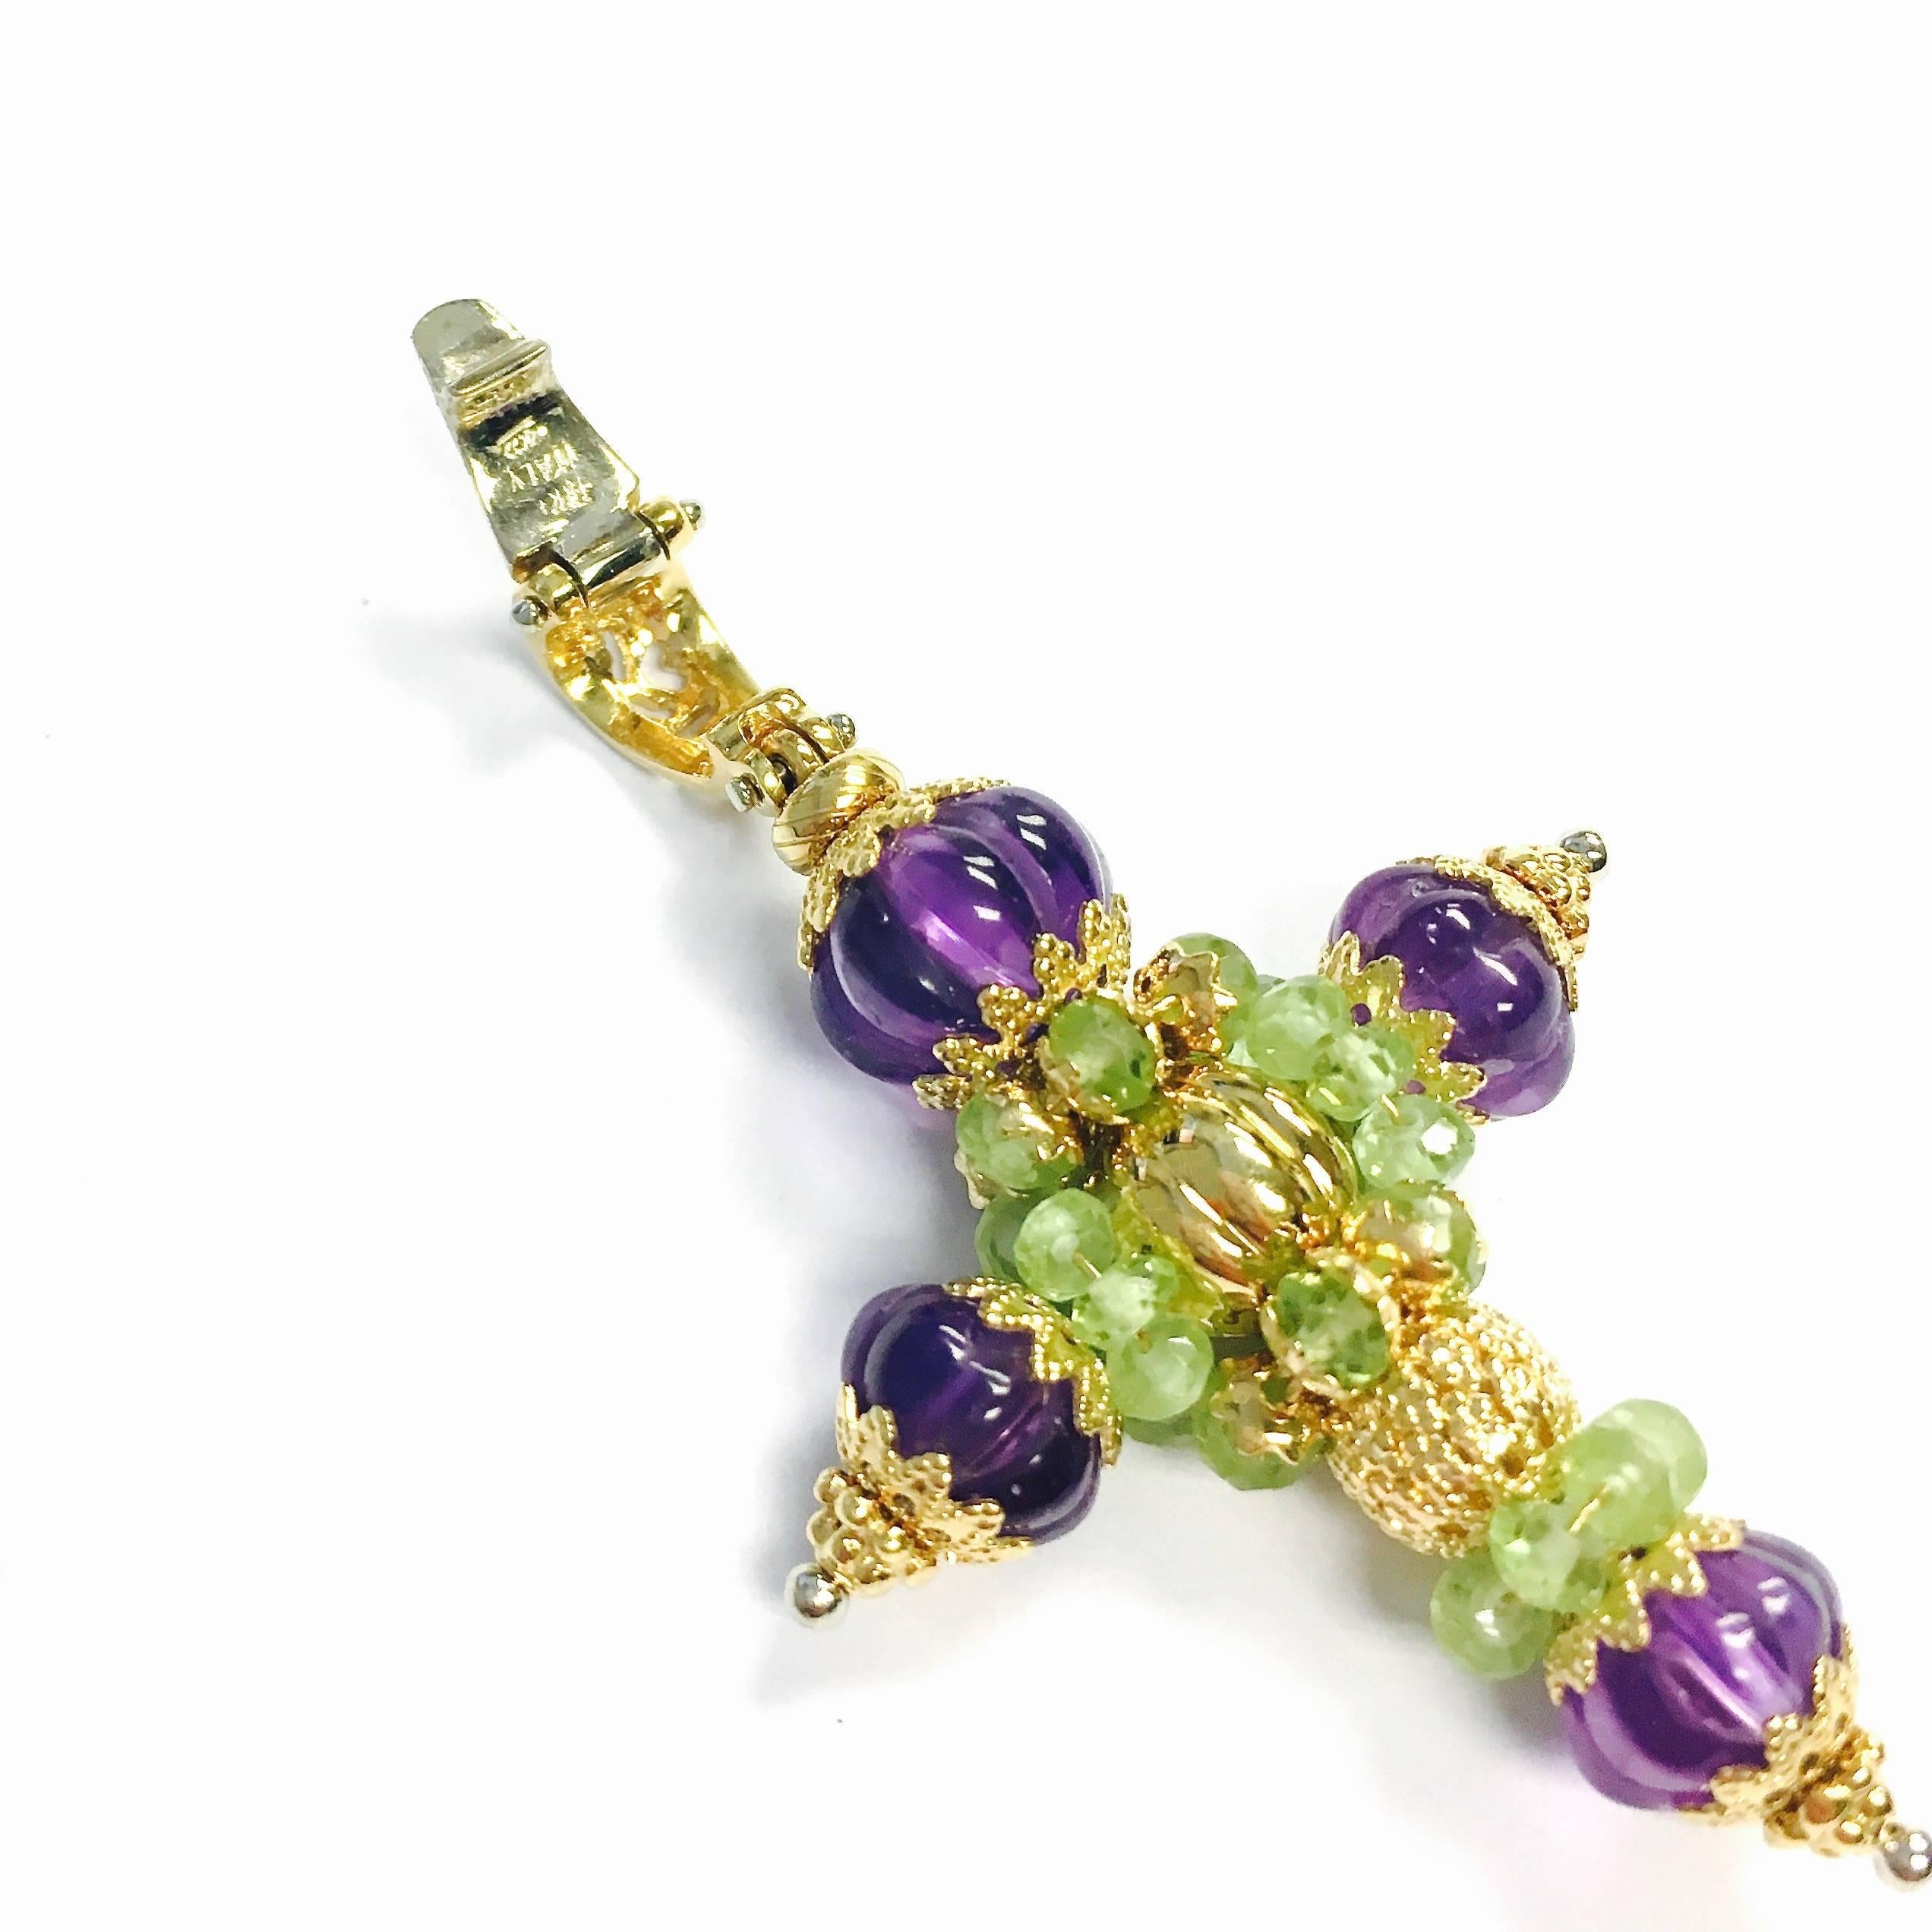 Unique 18K yellow gold cross pendant decorated with carved amethyst and faceted peridot beads. 
Measurements: 2 1/4" H x 1 5/16" W x 1/2" D
Weight: 10 grams